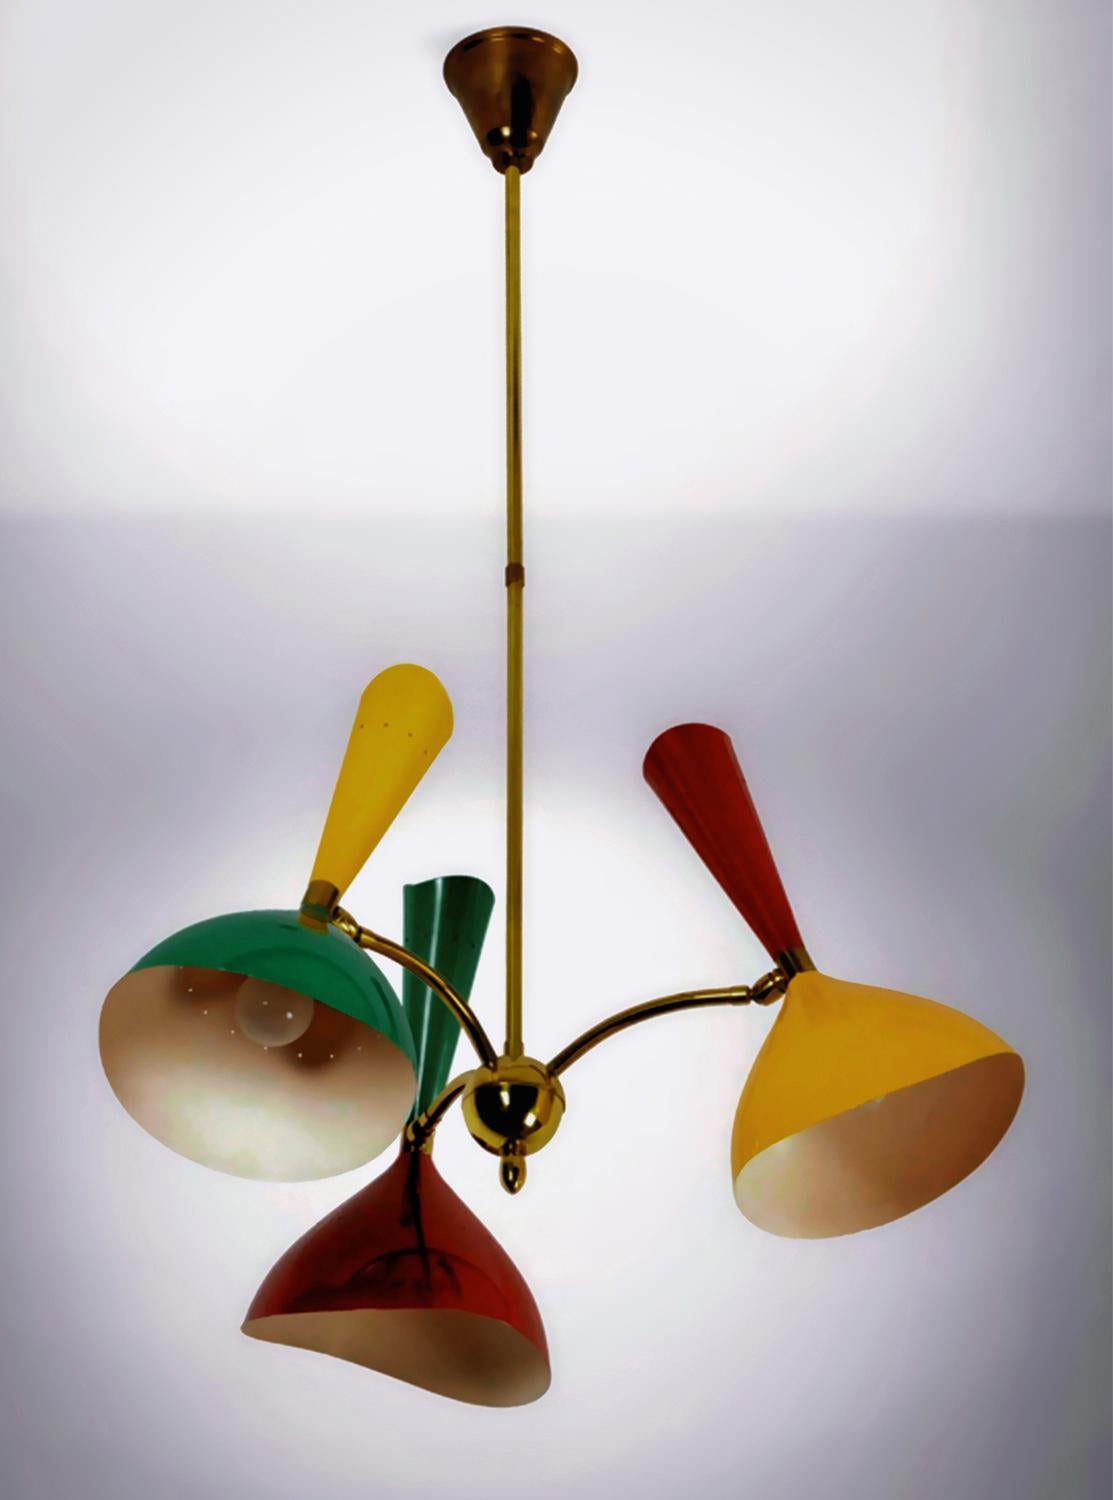 Superb Italian chandelier attributed to Stilnovo of the 1955.
It's equipped with three brass arms, each one with a metal lacquered diabolò shade in a double colour, all provided with hinge joints permitting their single angular adjustment in all